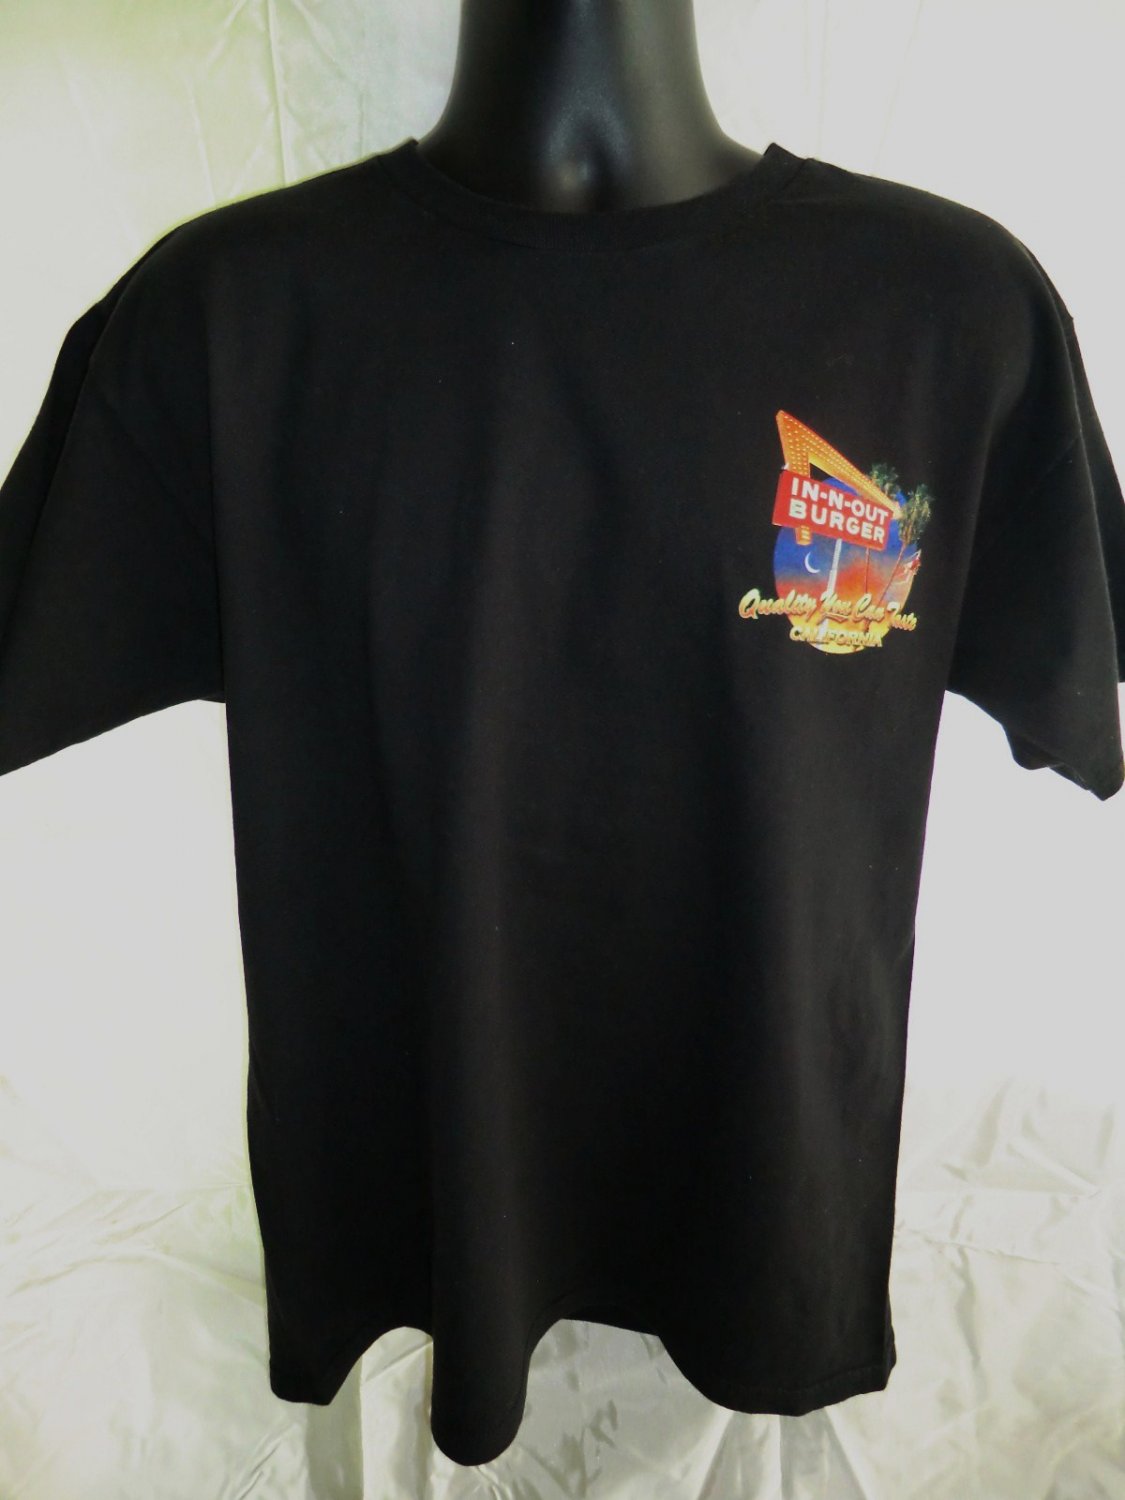 SOLD! In-N-Out Burger Black Large T-Shirt Cool Cars